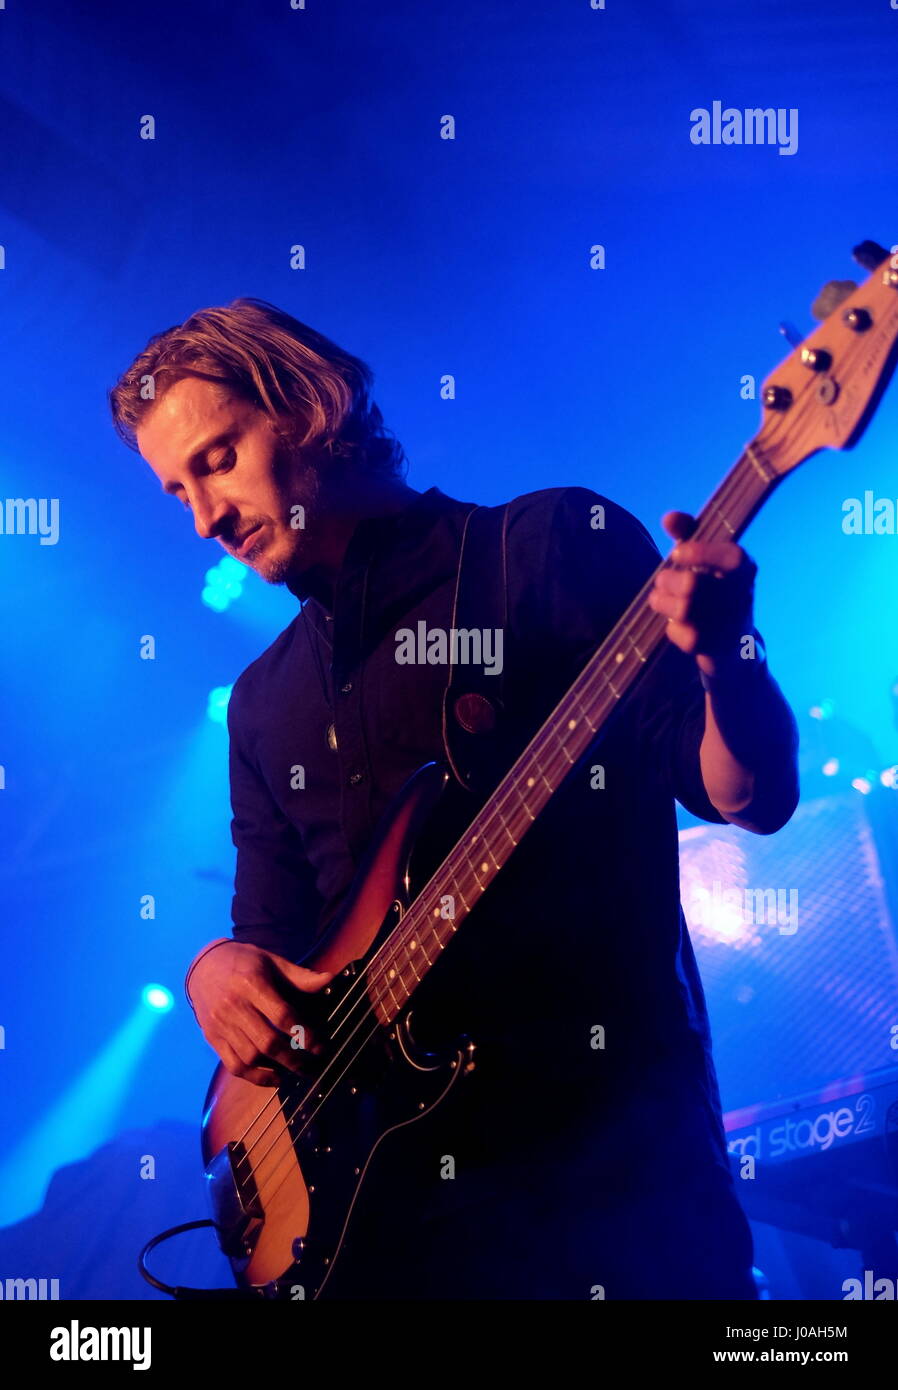 Bassist Like Ayling  with British band The Milk performing at the Engine Rooms Southampton UK Stock Photo